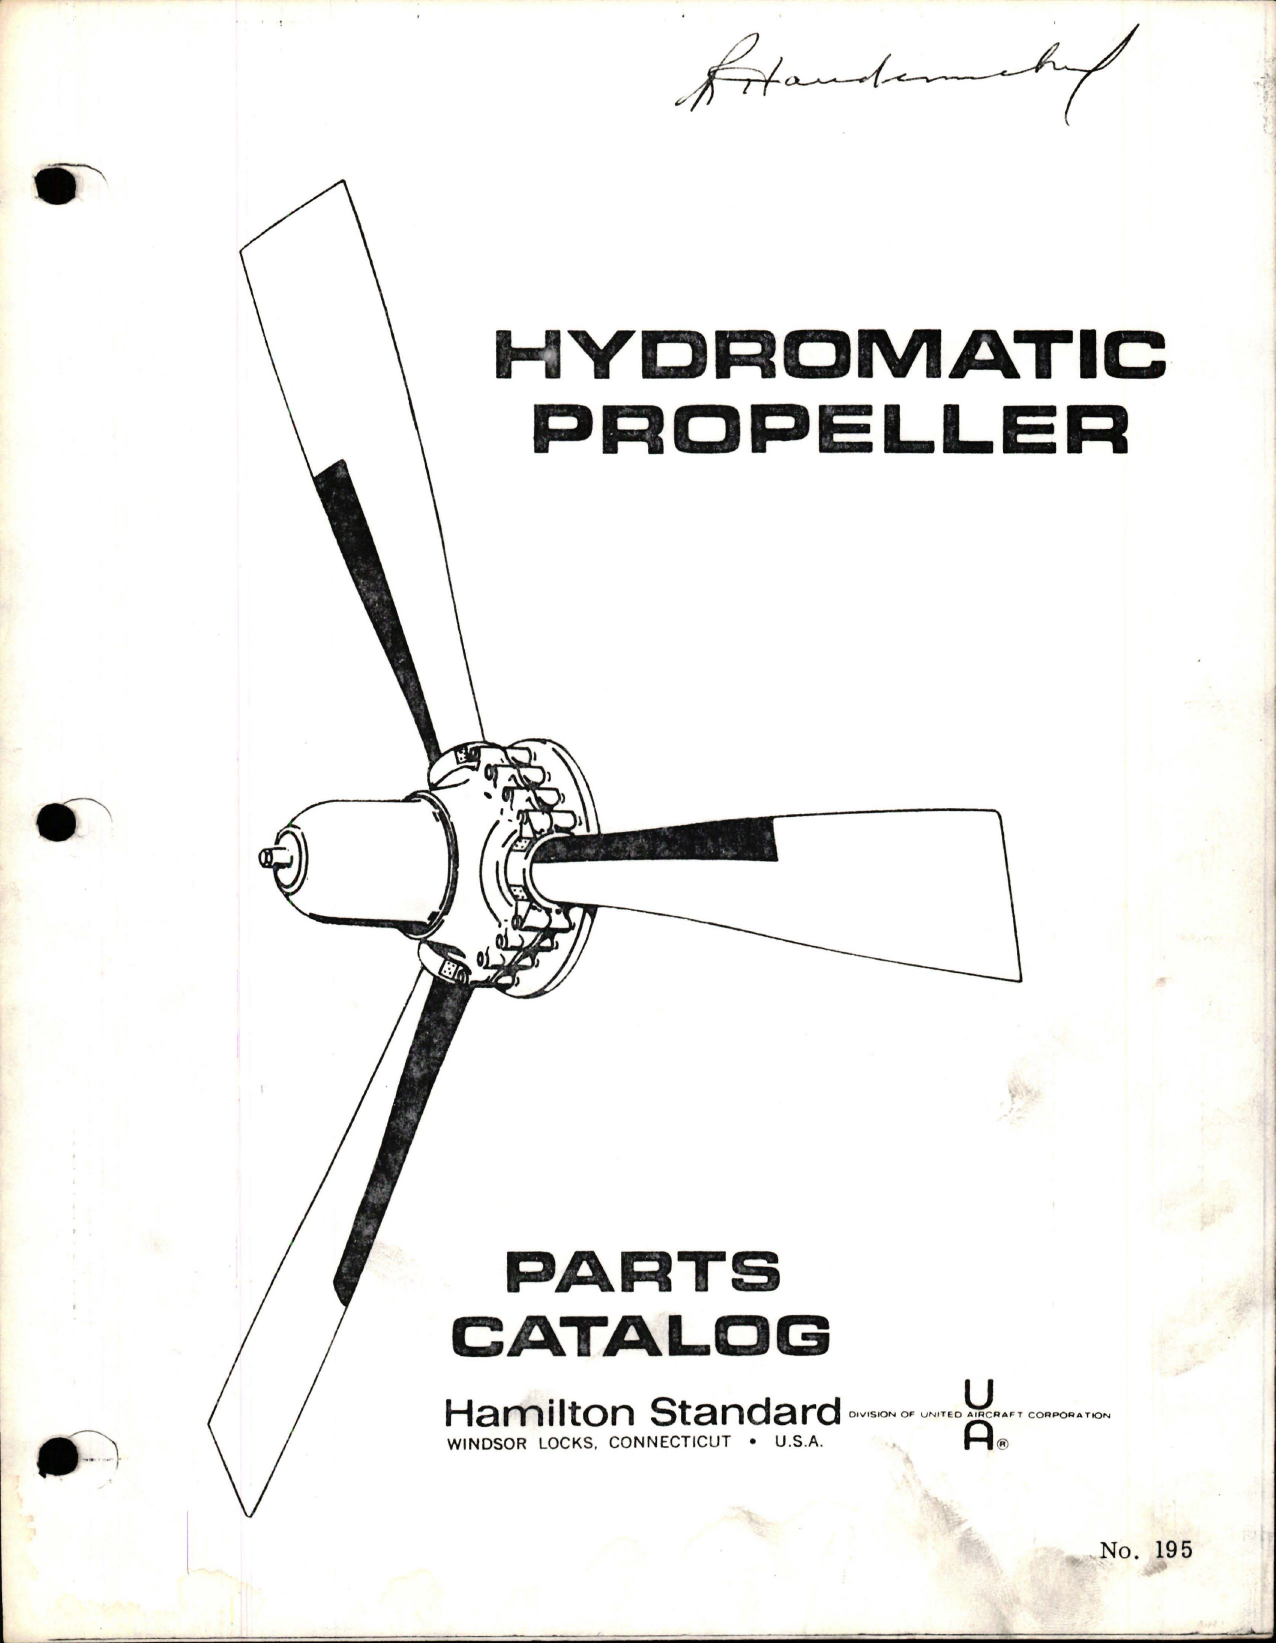 Sample page 1 from AirCorps Library document: Parts Catalog for Hydromatic Propeller